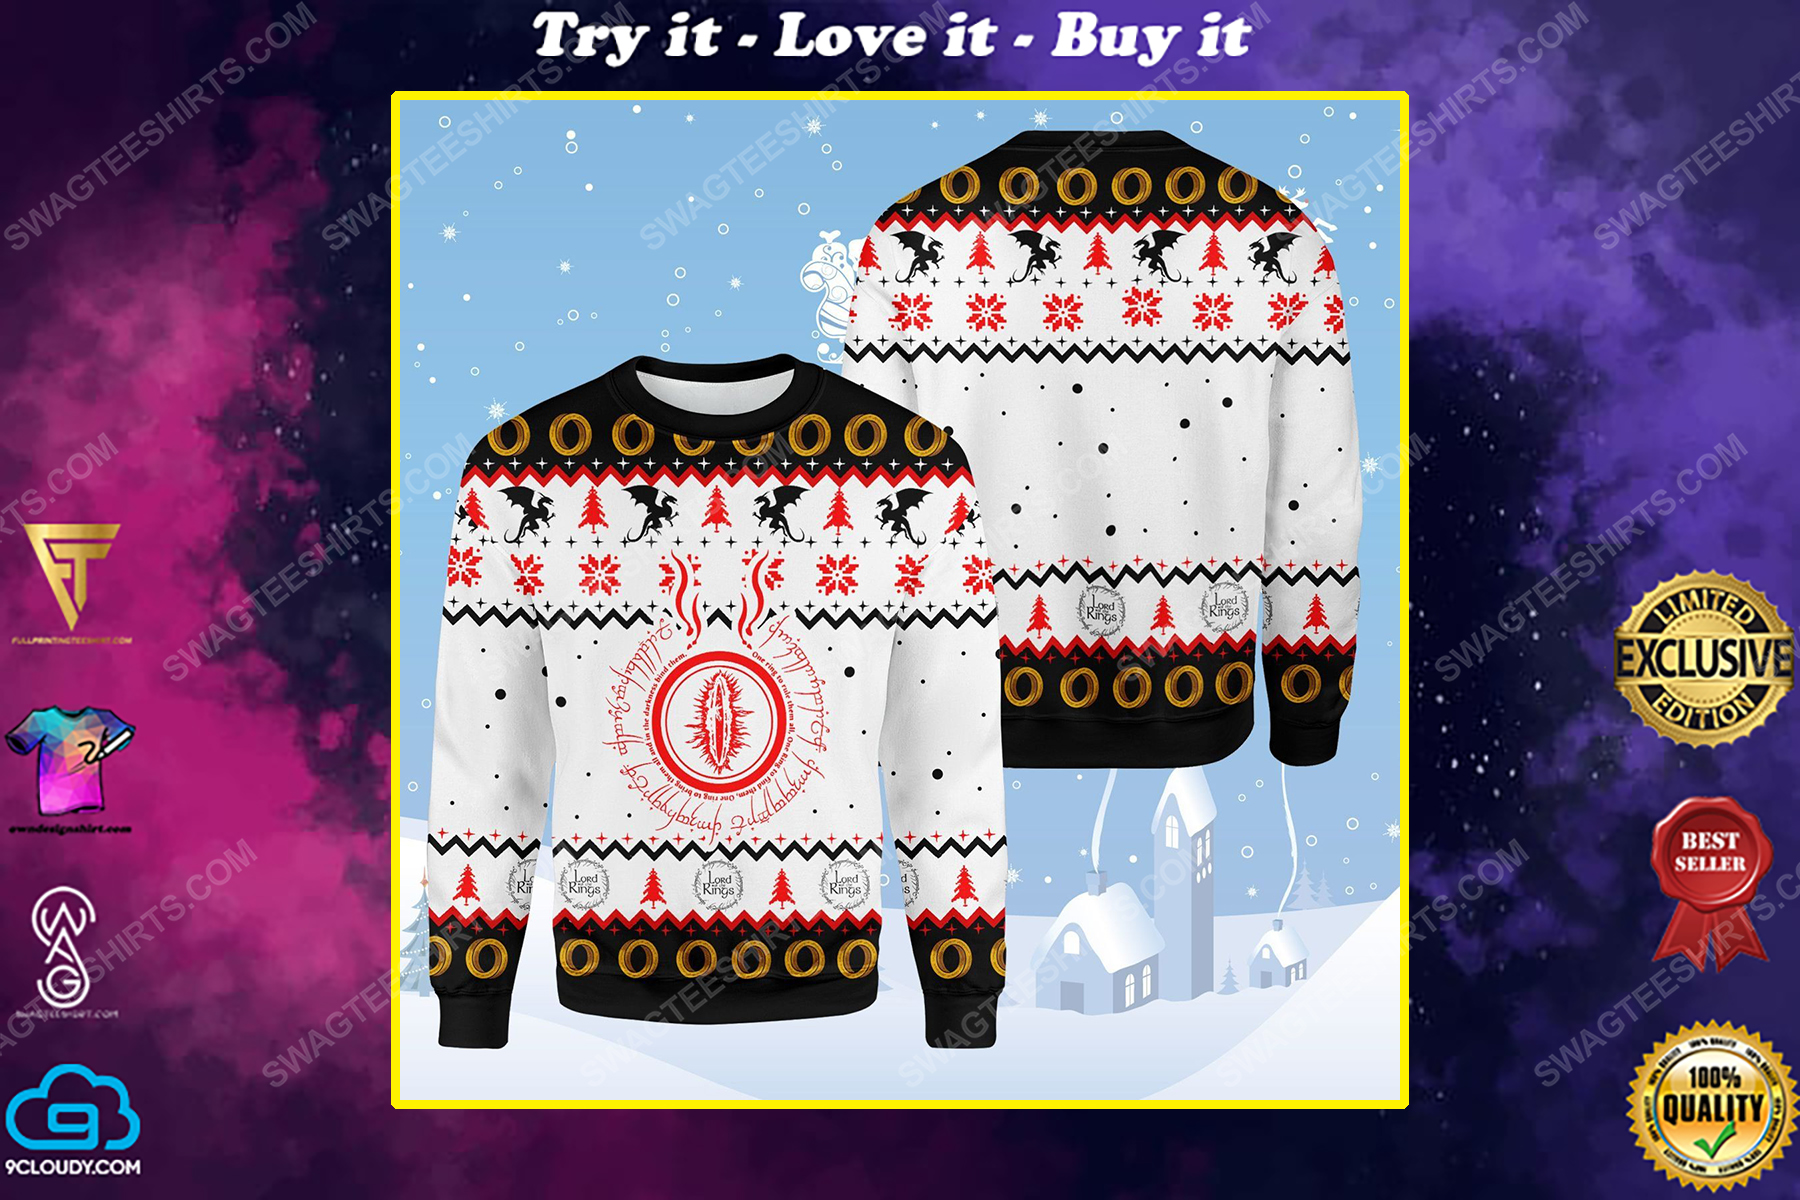 The lord of the rings one ring ugly christmas sweater